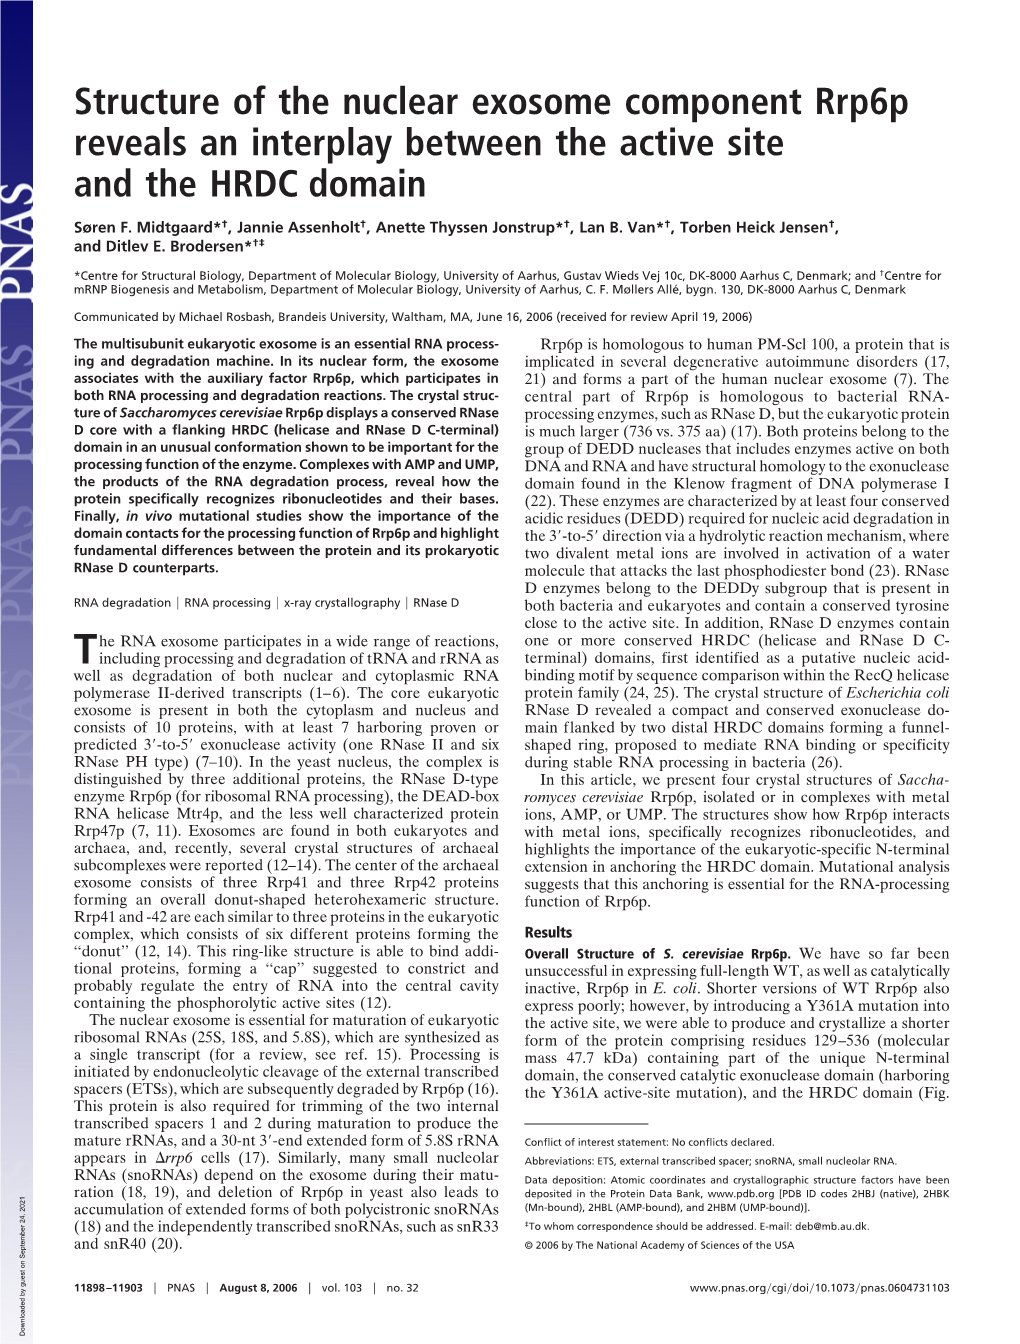 Structure of the Nuclear Exosome Component Rrp6p Reveals an Interplay Between the Active Site and the HRDC Domain